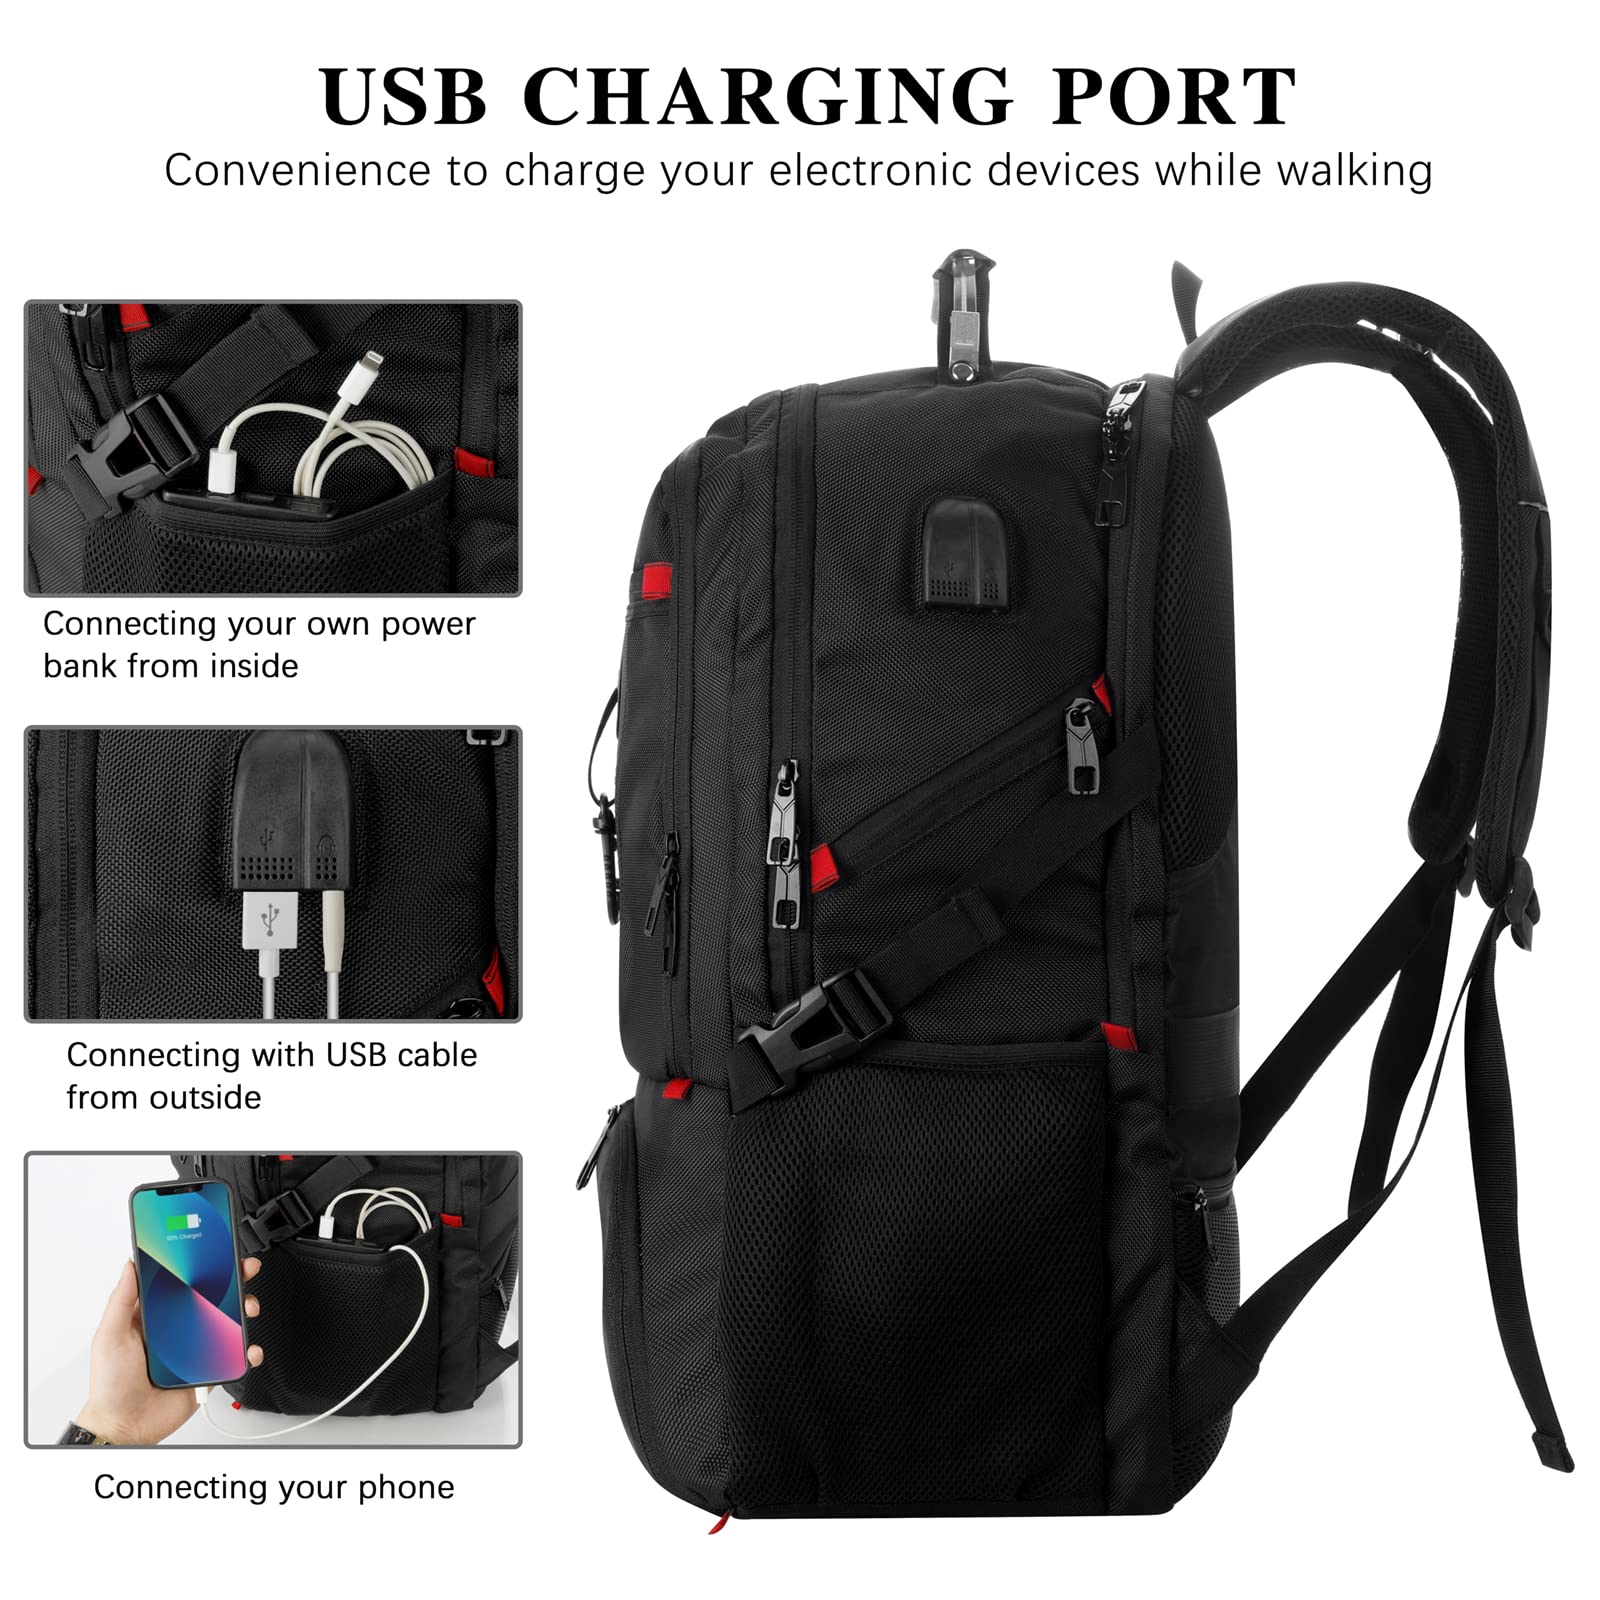 VESERI Travel Business Laptop Backpack for 18.4in PC with Shoe Compartment USB Charging Port,Sport Gym Bag for College Hiking Camping,Waterproof Bookbag School Backpack for Men Women Boys,Black